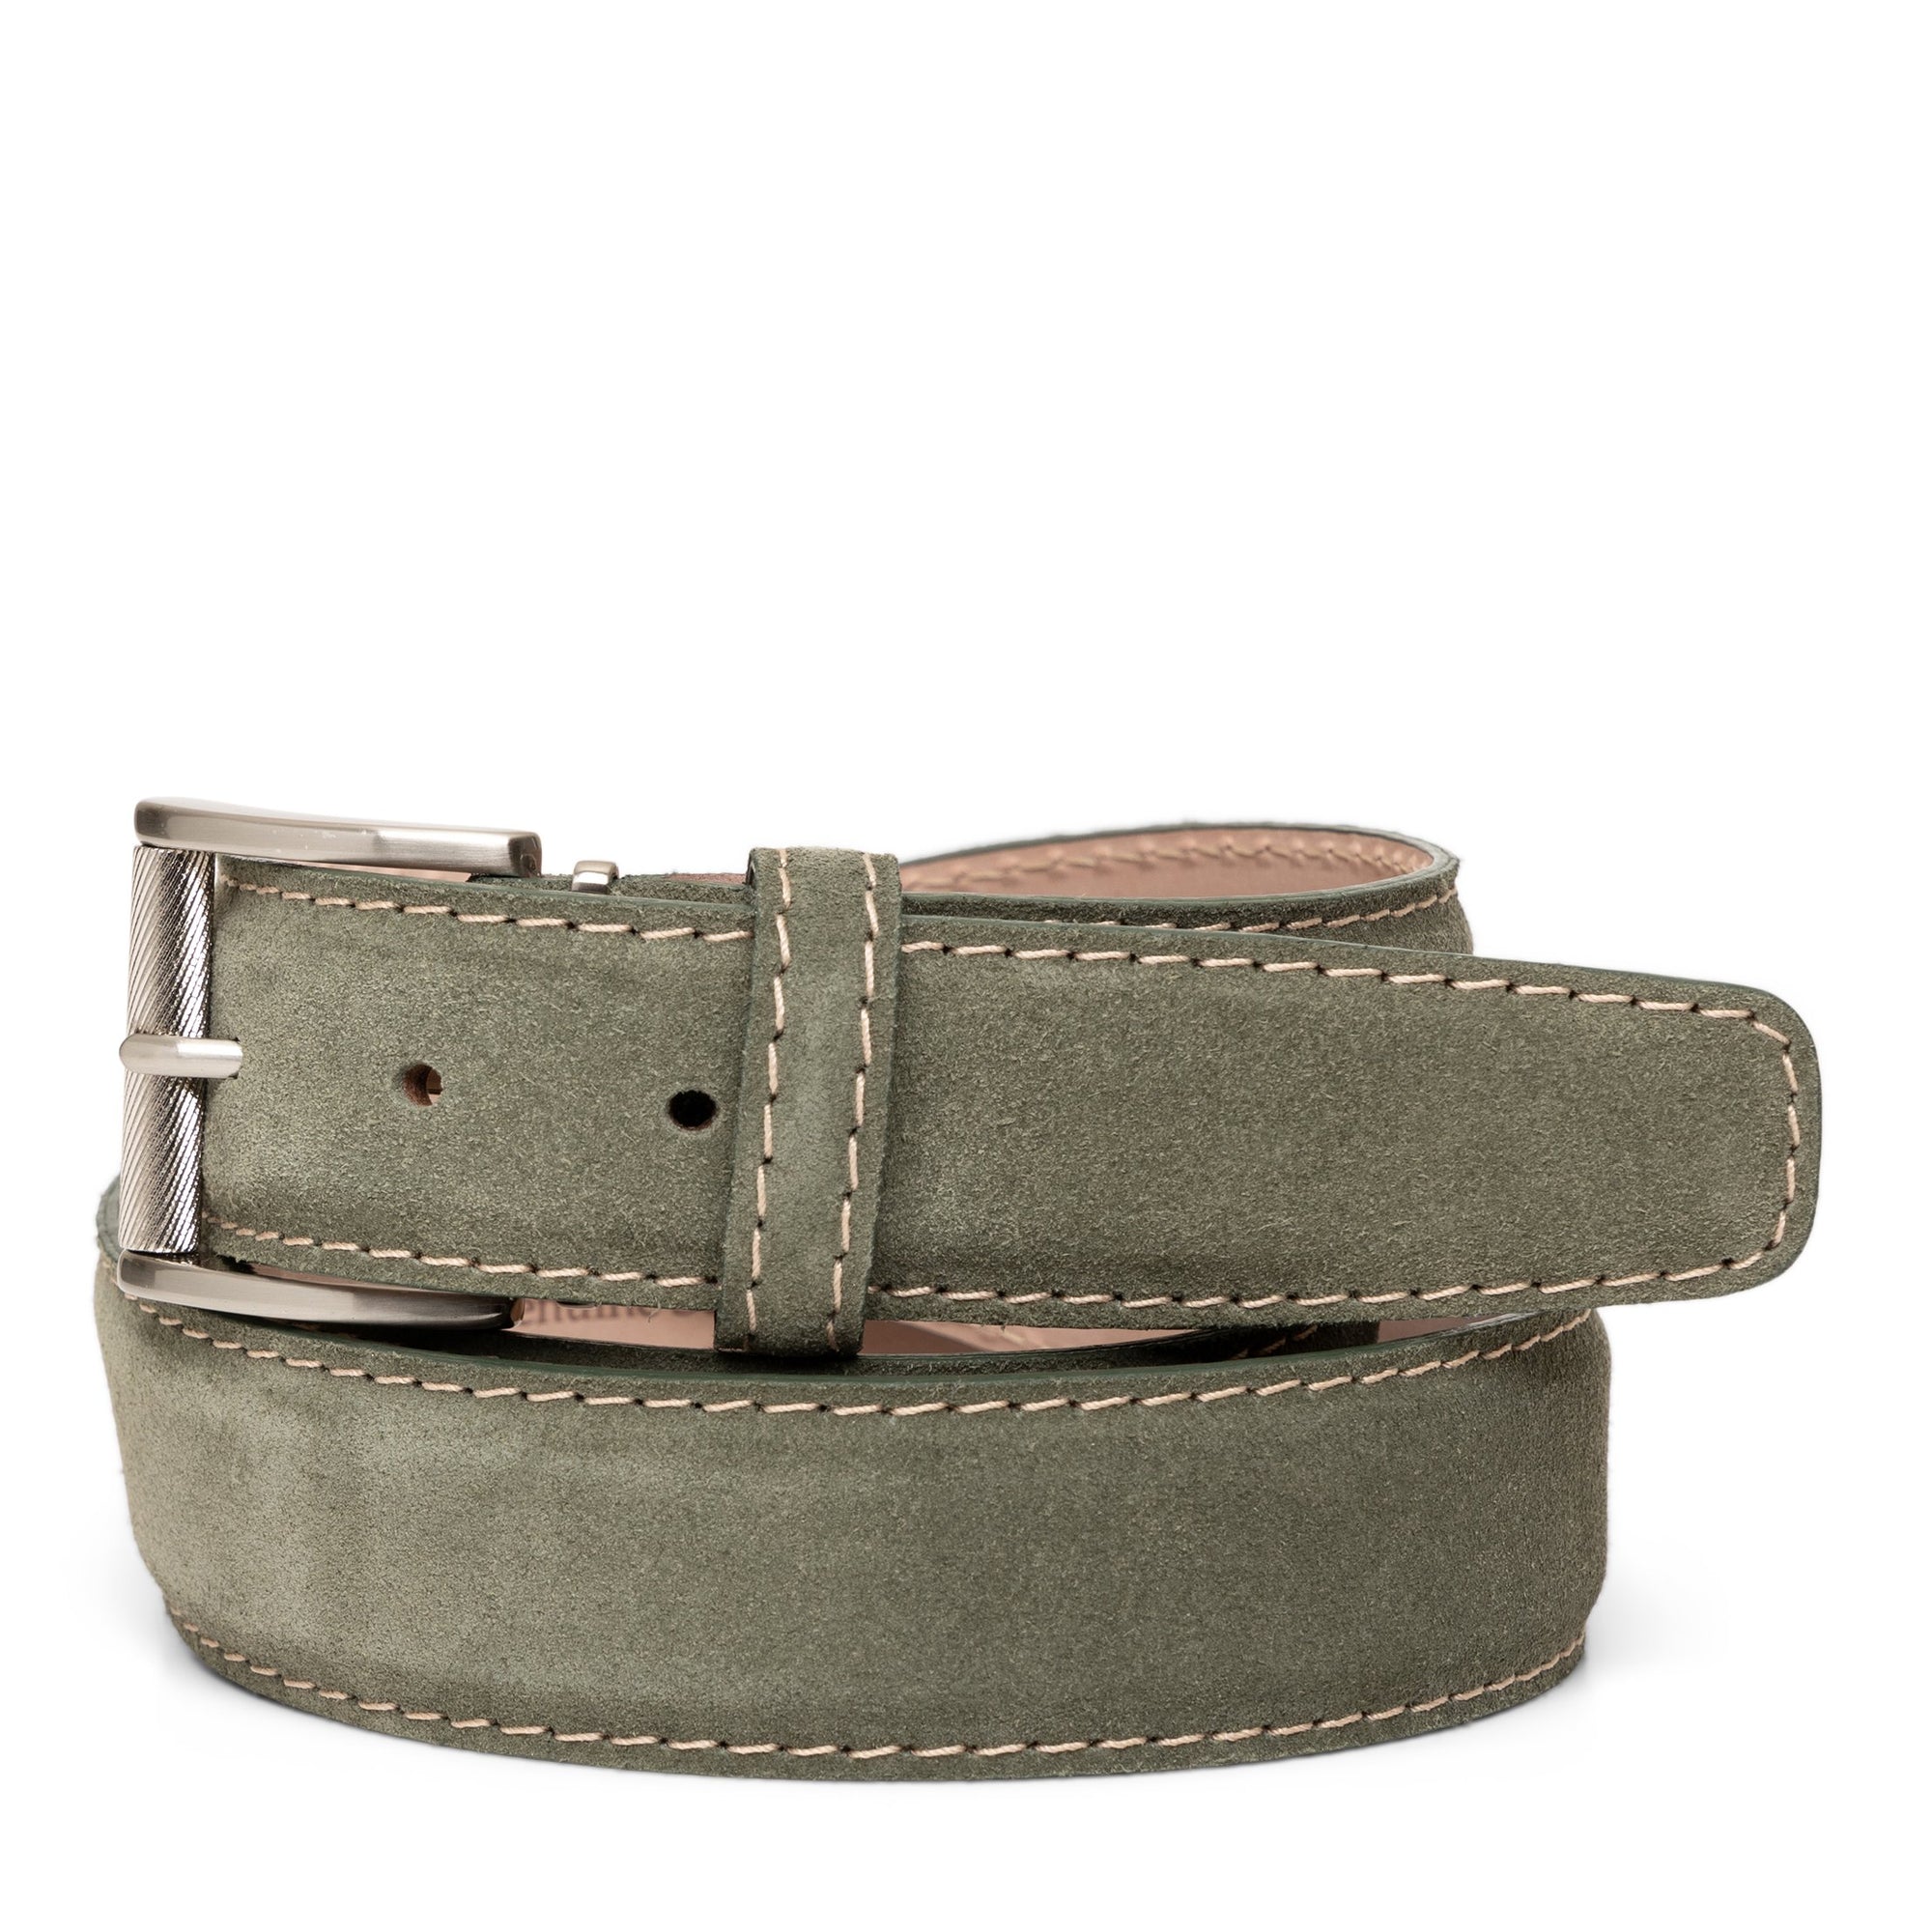 Italian Suede Belt in Olive with Vegetable Stitching by L.E.N. Bespoke